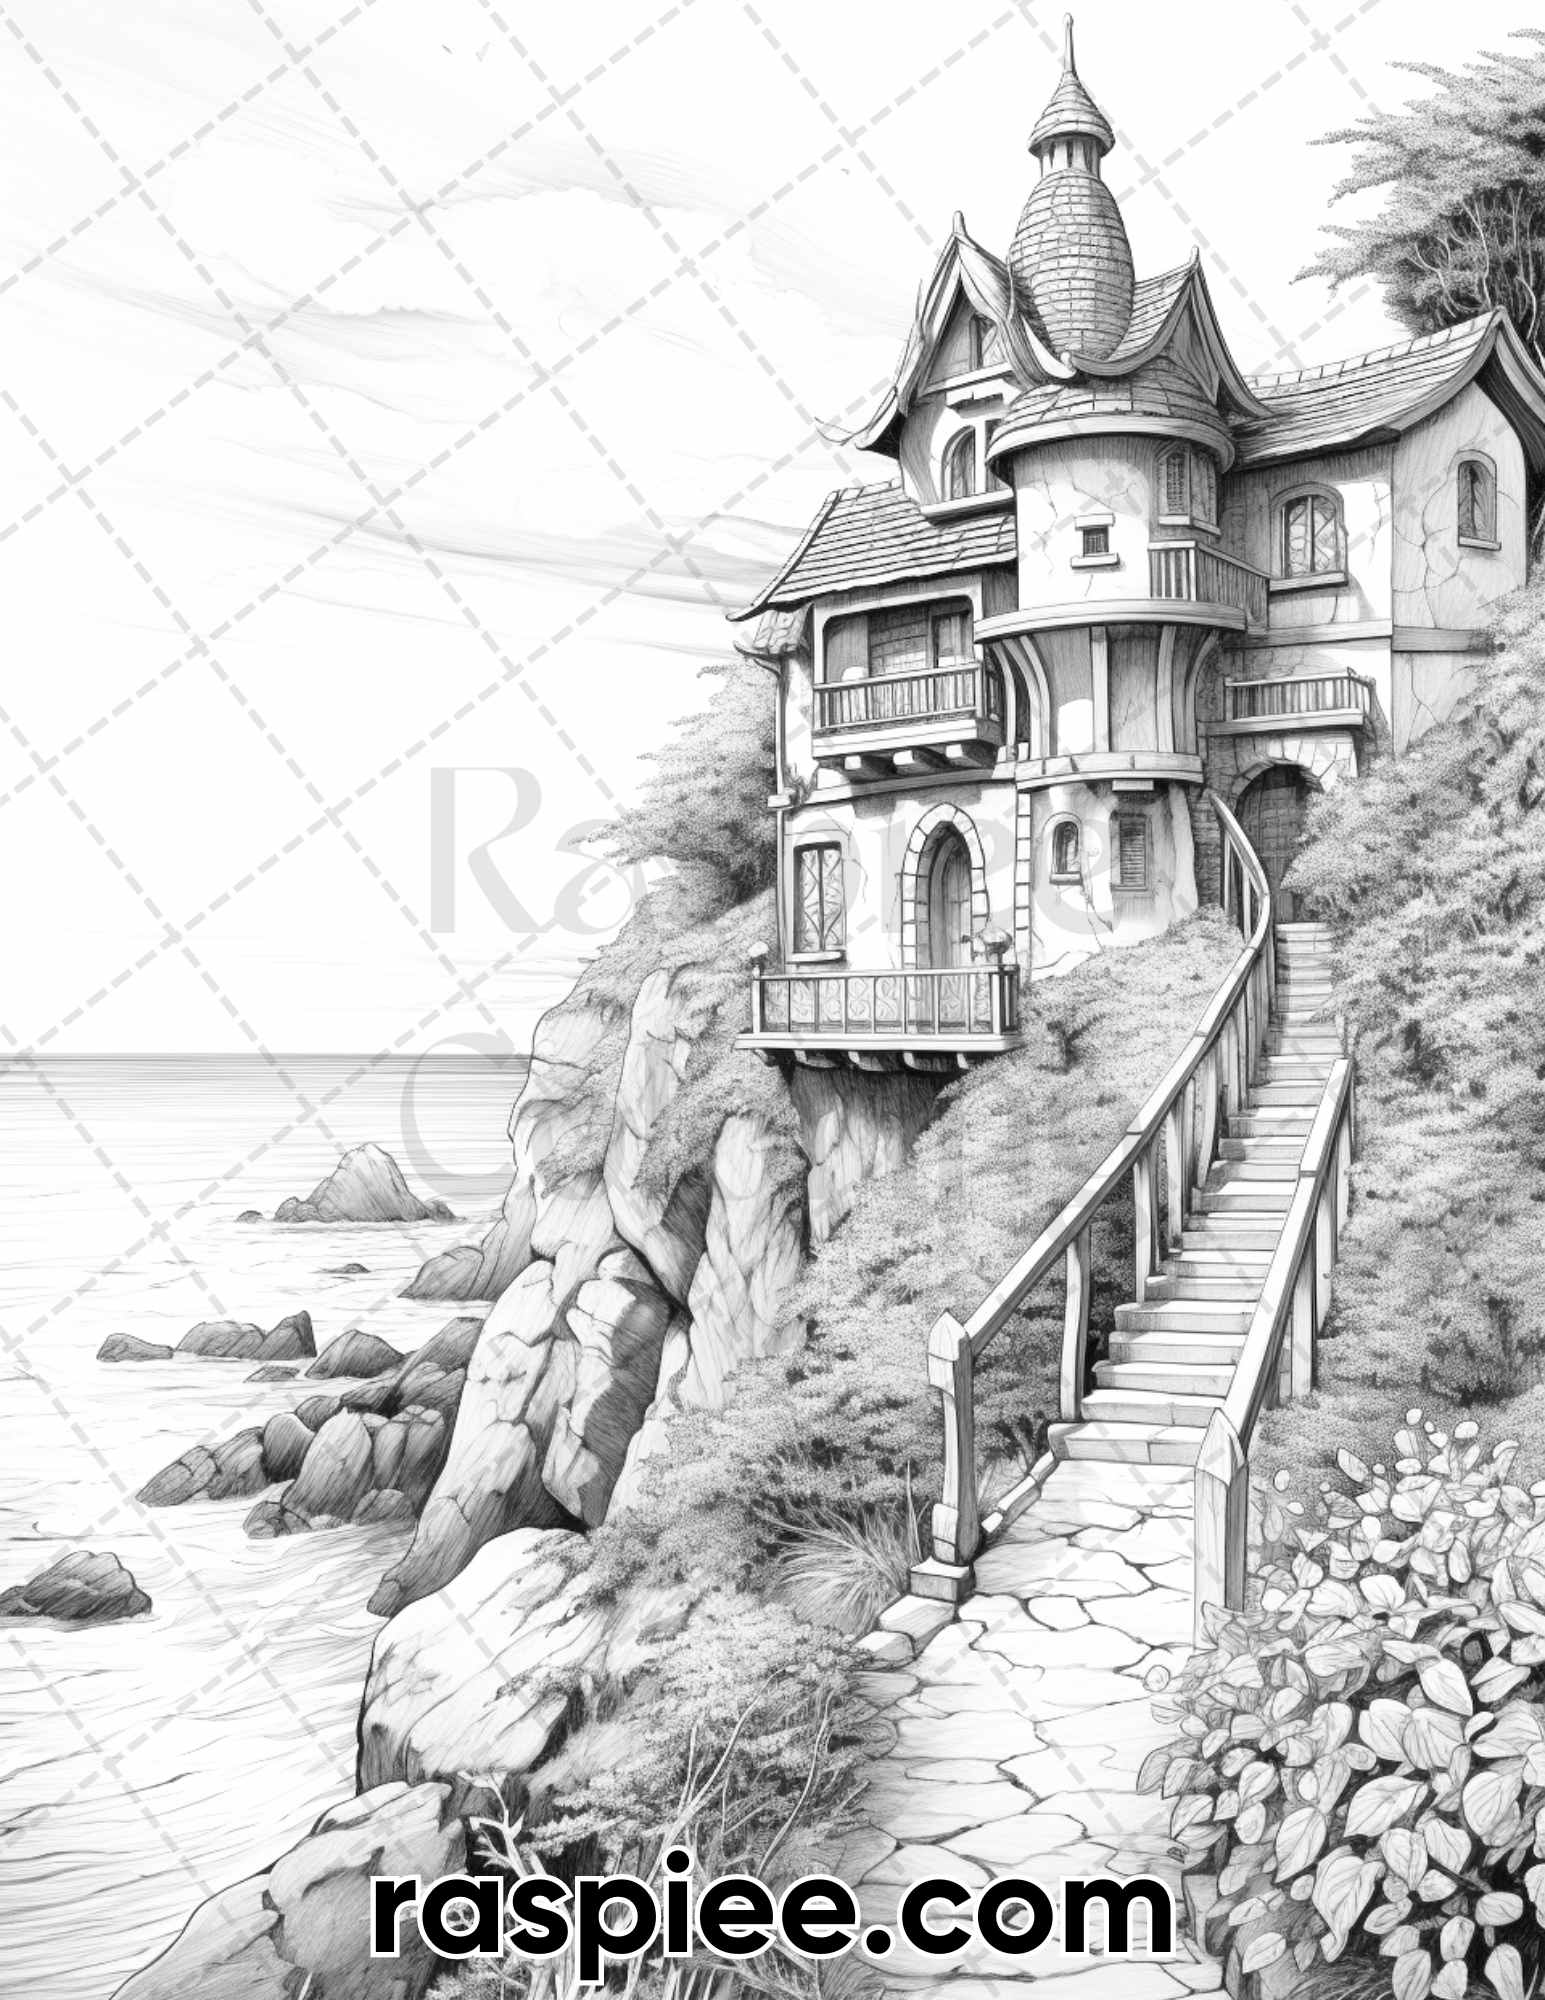 Fairy Beach House Coloring Page, Relaxing Adult Coloring Sheet, Beach House Coloring Page, Stress Relief Coloring Page, Creative Coloring Design, Decorative Coloring Sheet, Fantasy Coloring Page, Fairytale Coloring Page